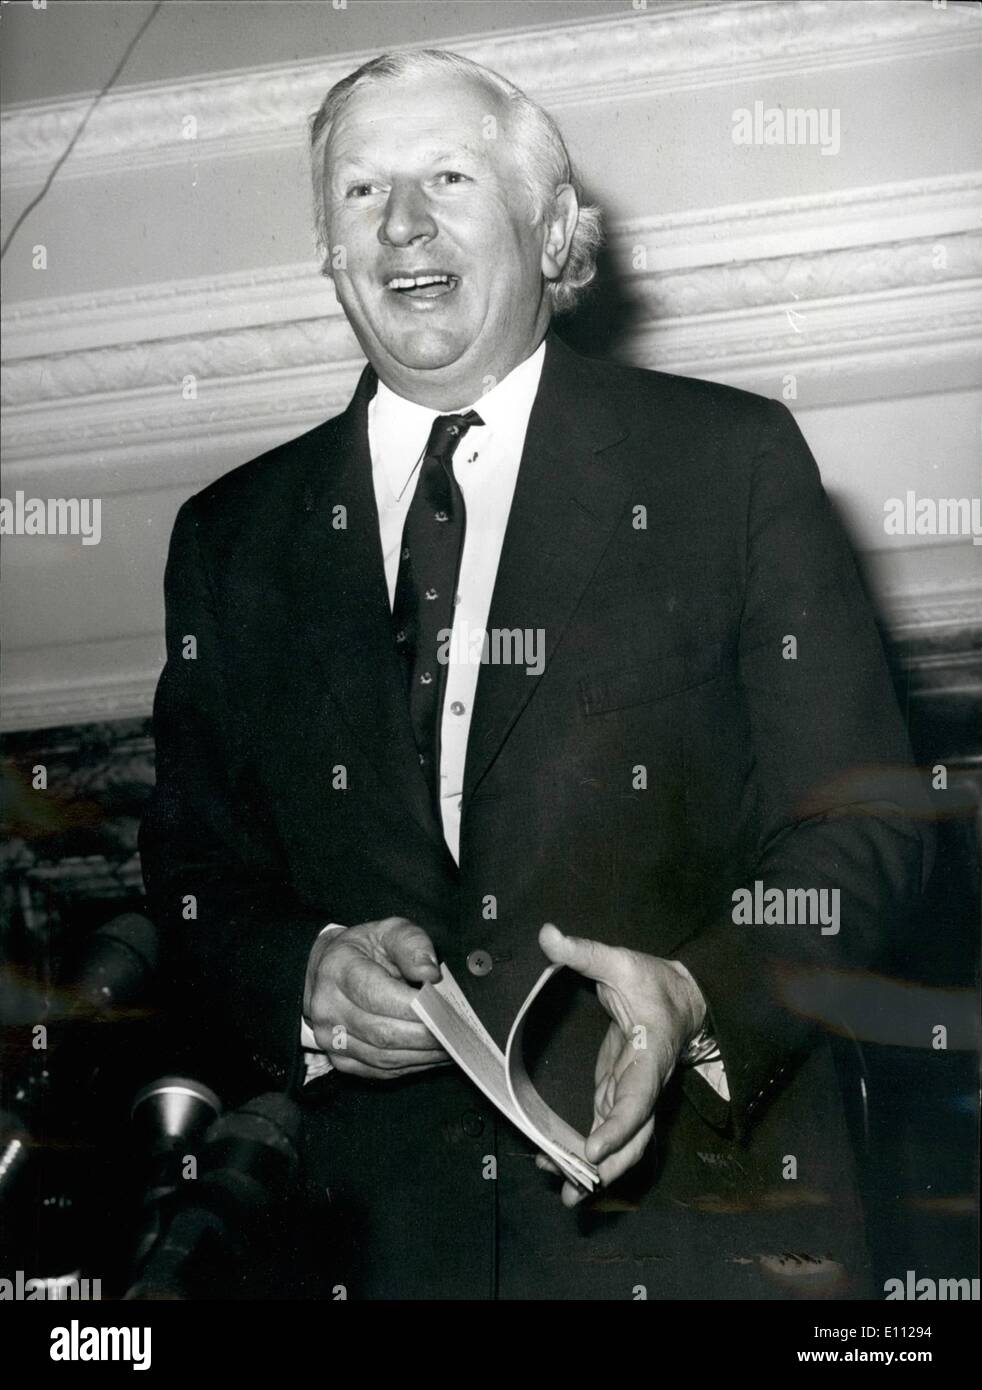 Feb. 02, 1975 - James Prior to Enter Battle for Tory Leadership: Speaking at a Public Relations Consultants' Lunch, at the Constitutional Club today, Mr. James Prior announced that he would be a candidate for next week's second ballot for the leadership of the Conservative Party. Keystone Photo Shows:- Mr. James Prior pictured at the Lunch today. Stock Photo